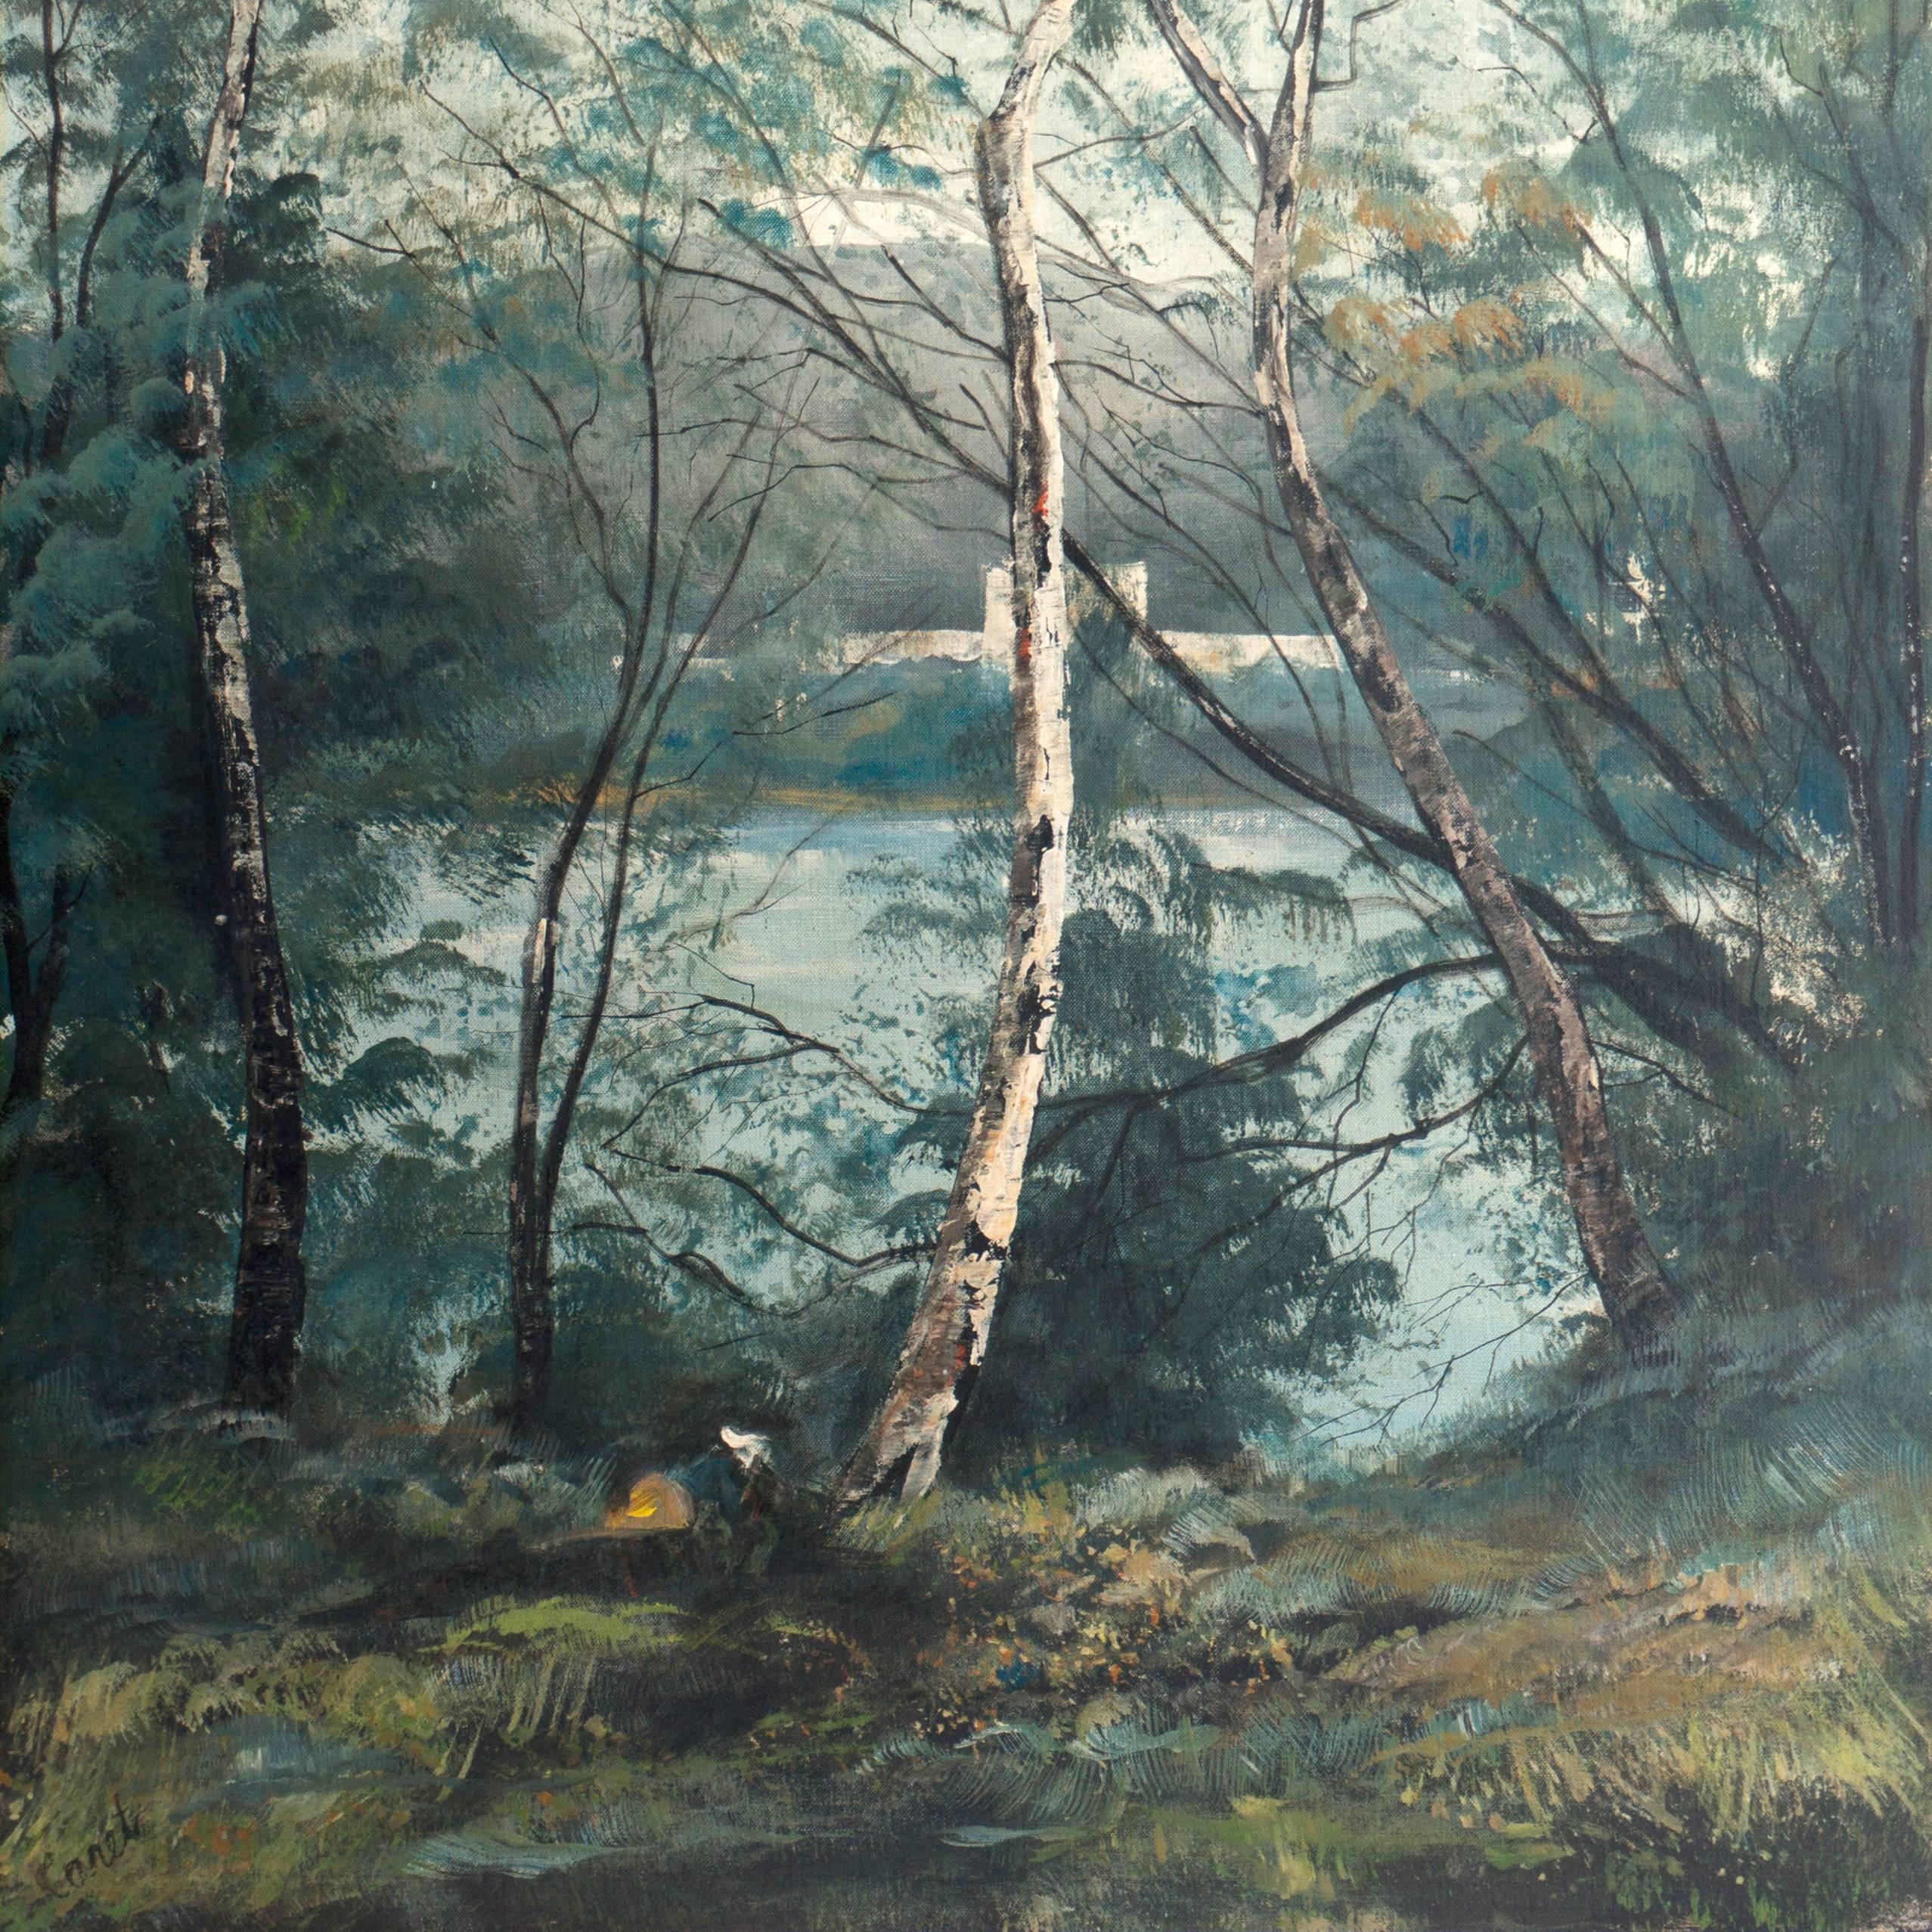 'River Landscape with Birch Trees', Italianate Romanticism - Painting by Caret